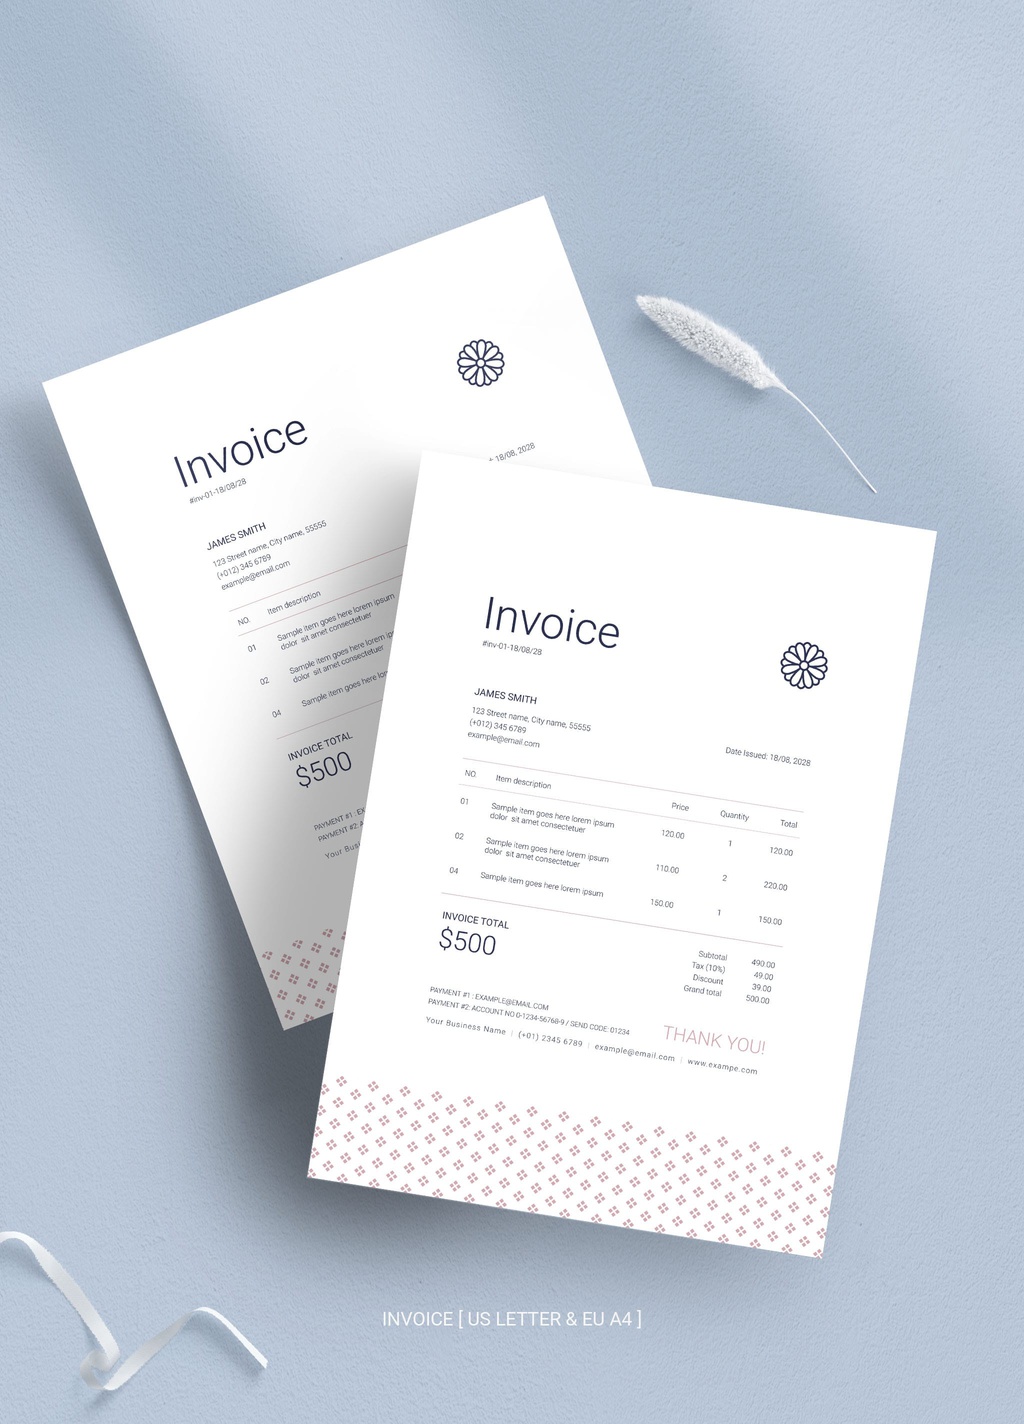 Invoice Layout with Floral Logo and Minimal Style (AI Format)